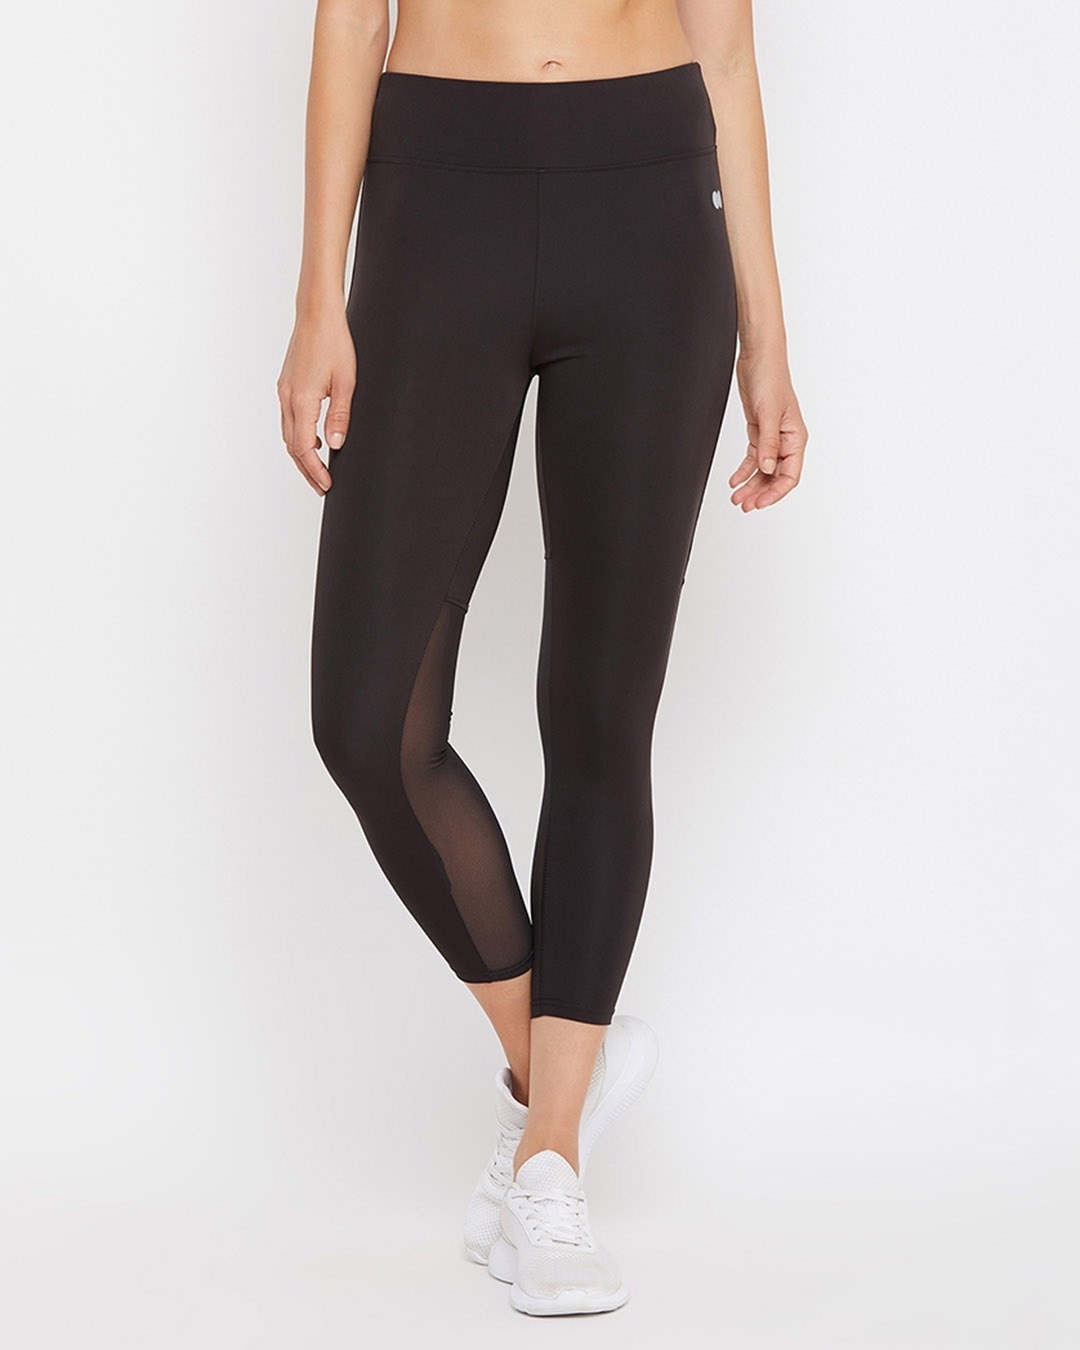 CU COPPER SLIM Copper Slim High Waisted Activewear Pants - Womens India |  Ubuy